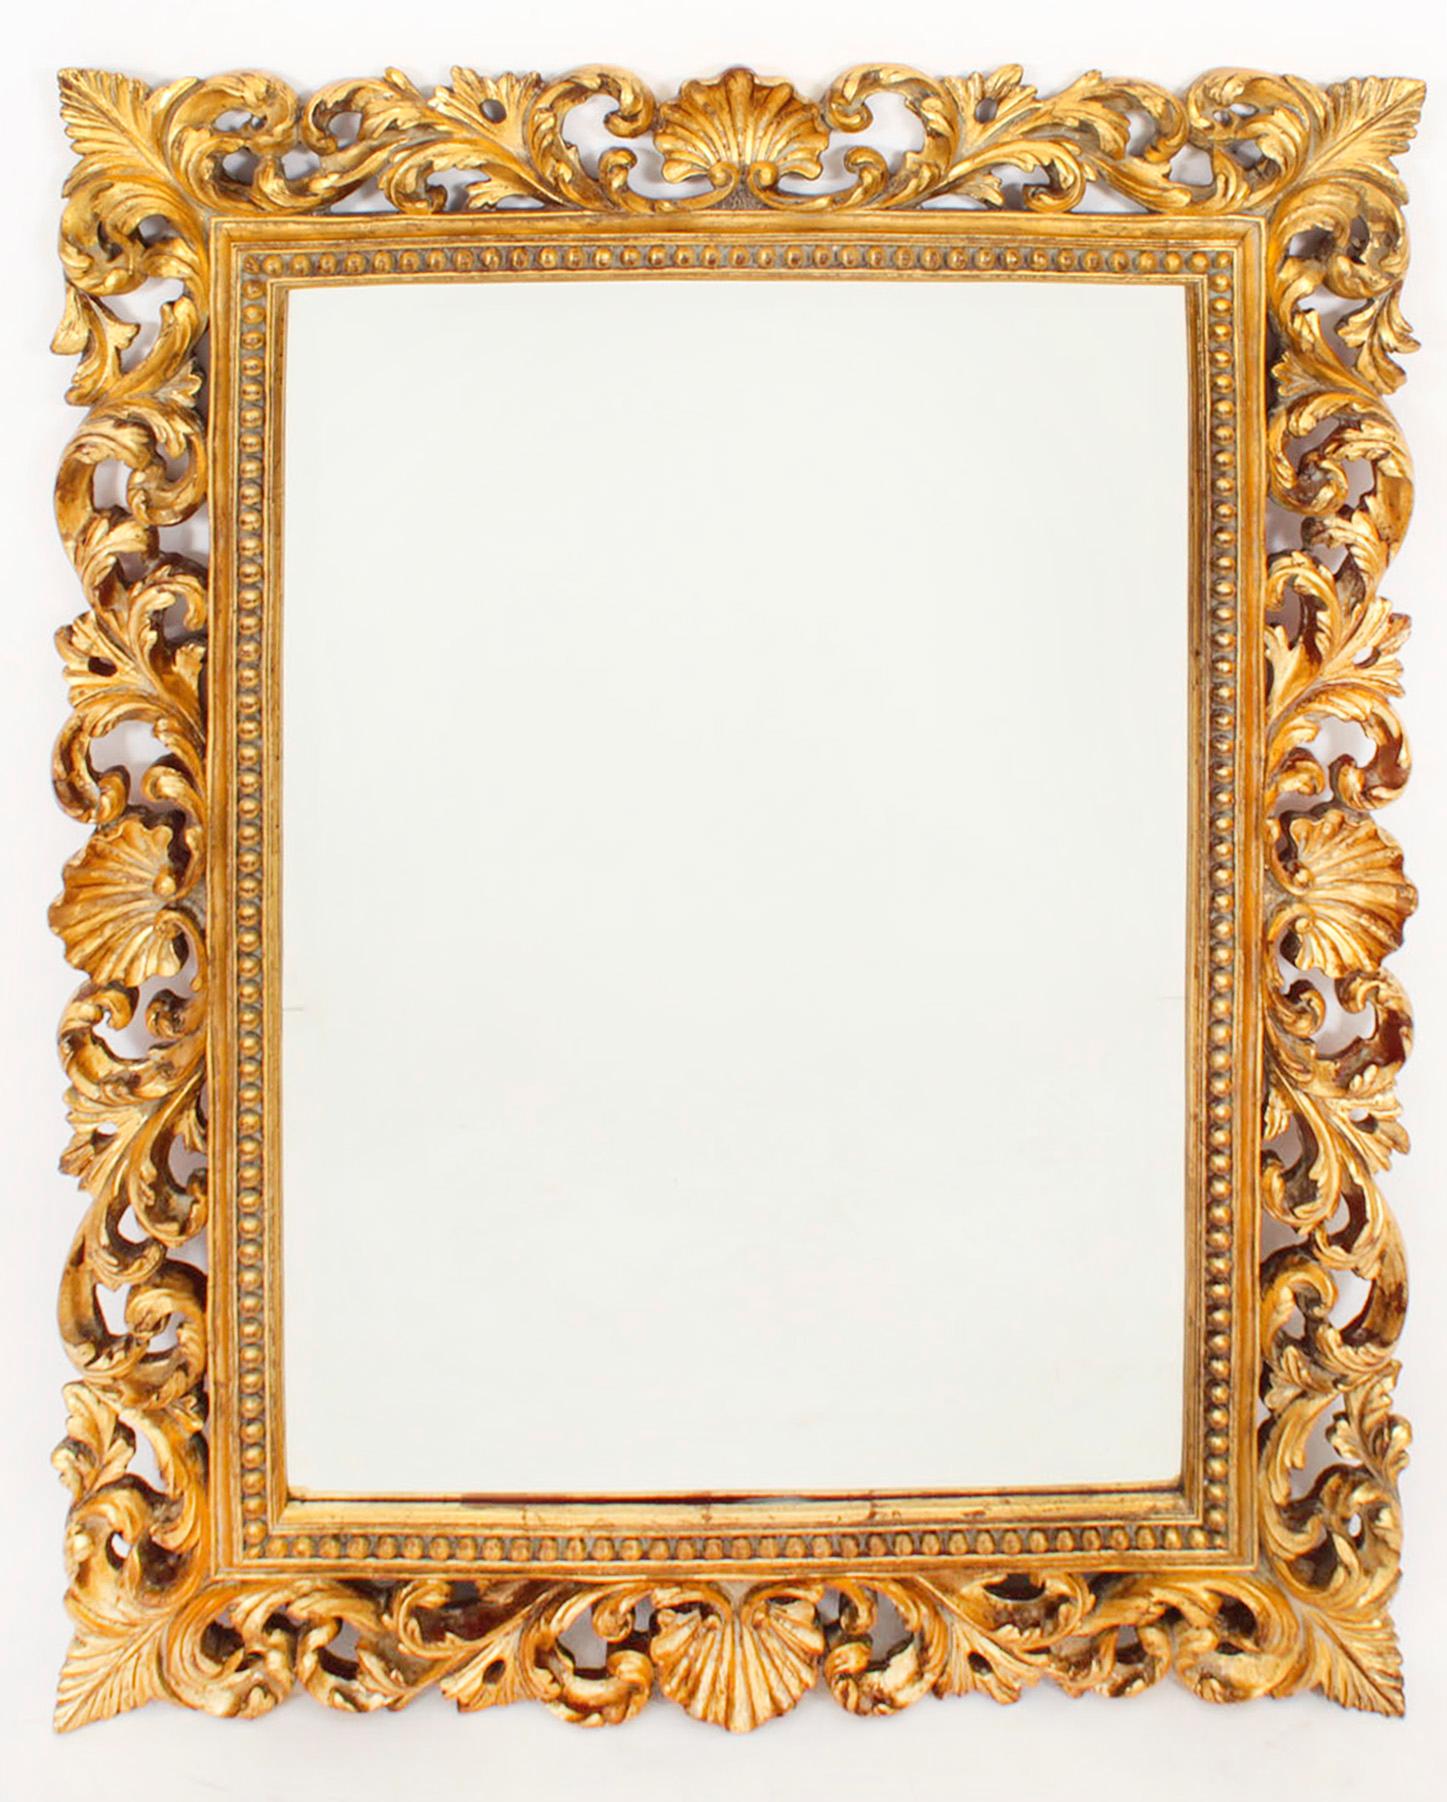 A highly decorative Florentine  overmantle mirror, mid 20th Century in date. 

This rectangular mirror consists of a  giltwood frame with an arrow beaded border and scrolling acanthus leaf foliate decoration in high relief, it can be hung portrait